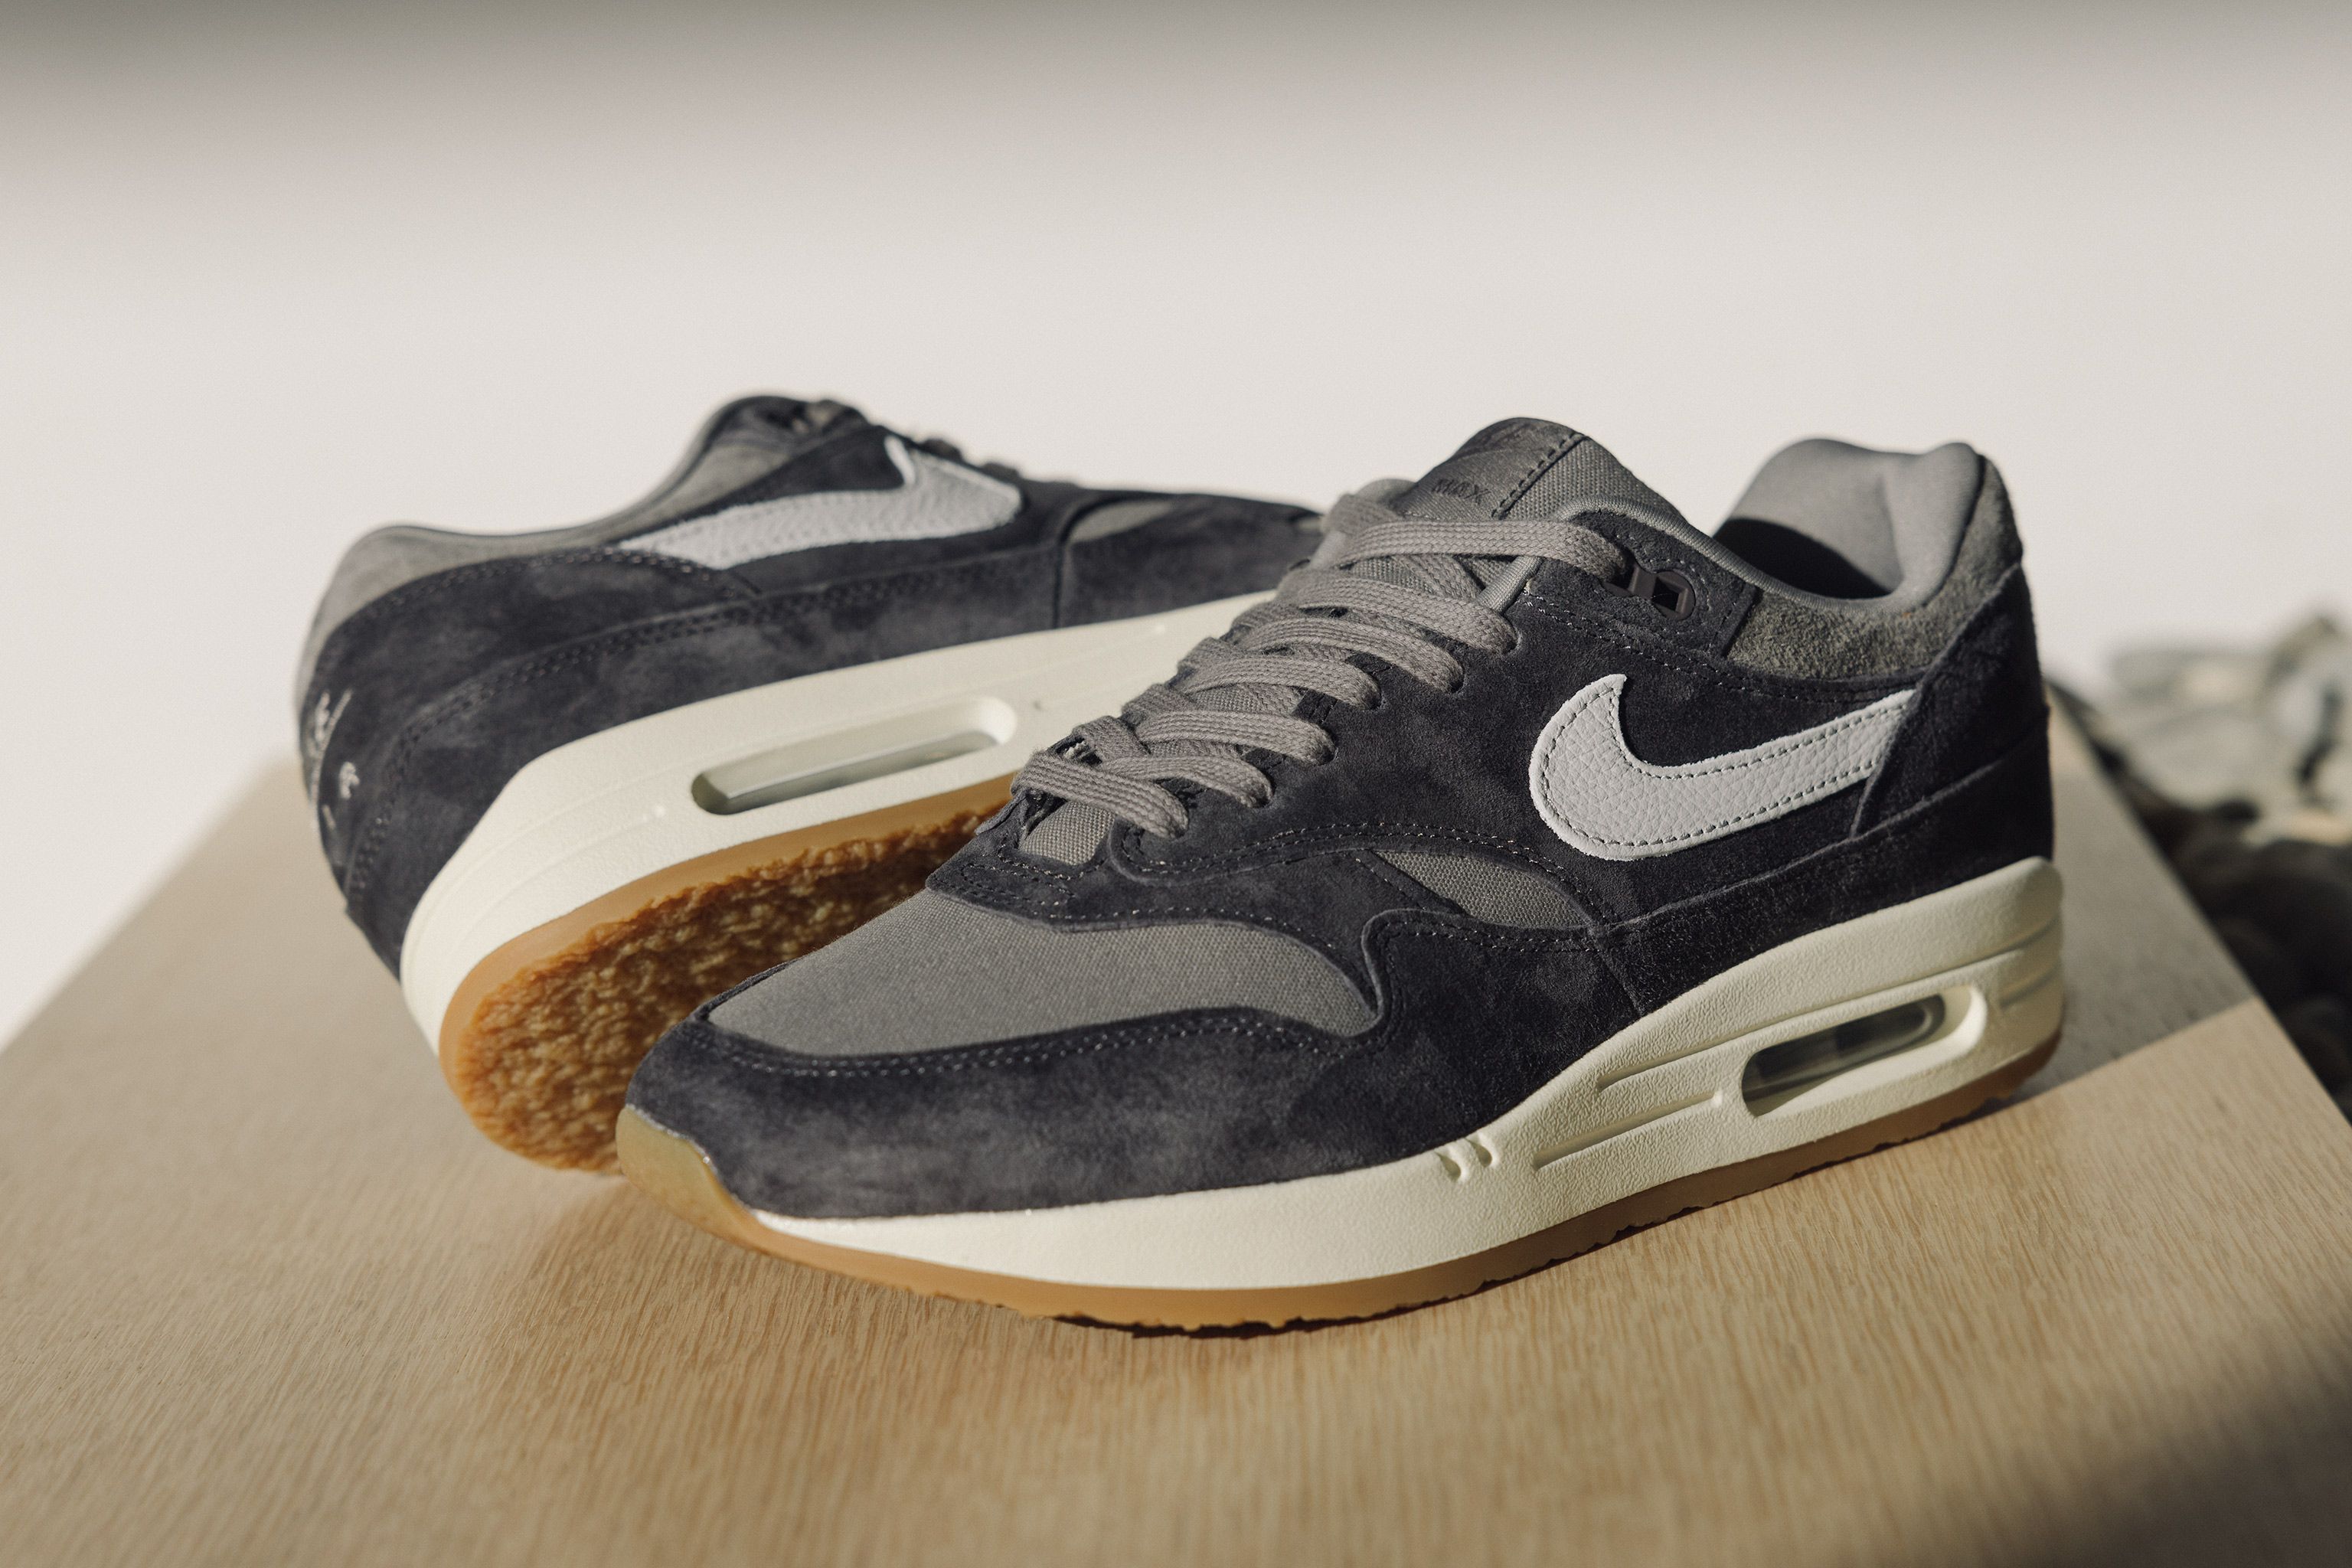 Nike Air Max 1 Premium 2 Soft Gray | Release Date: 02.24.23 | HAVEN